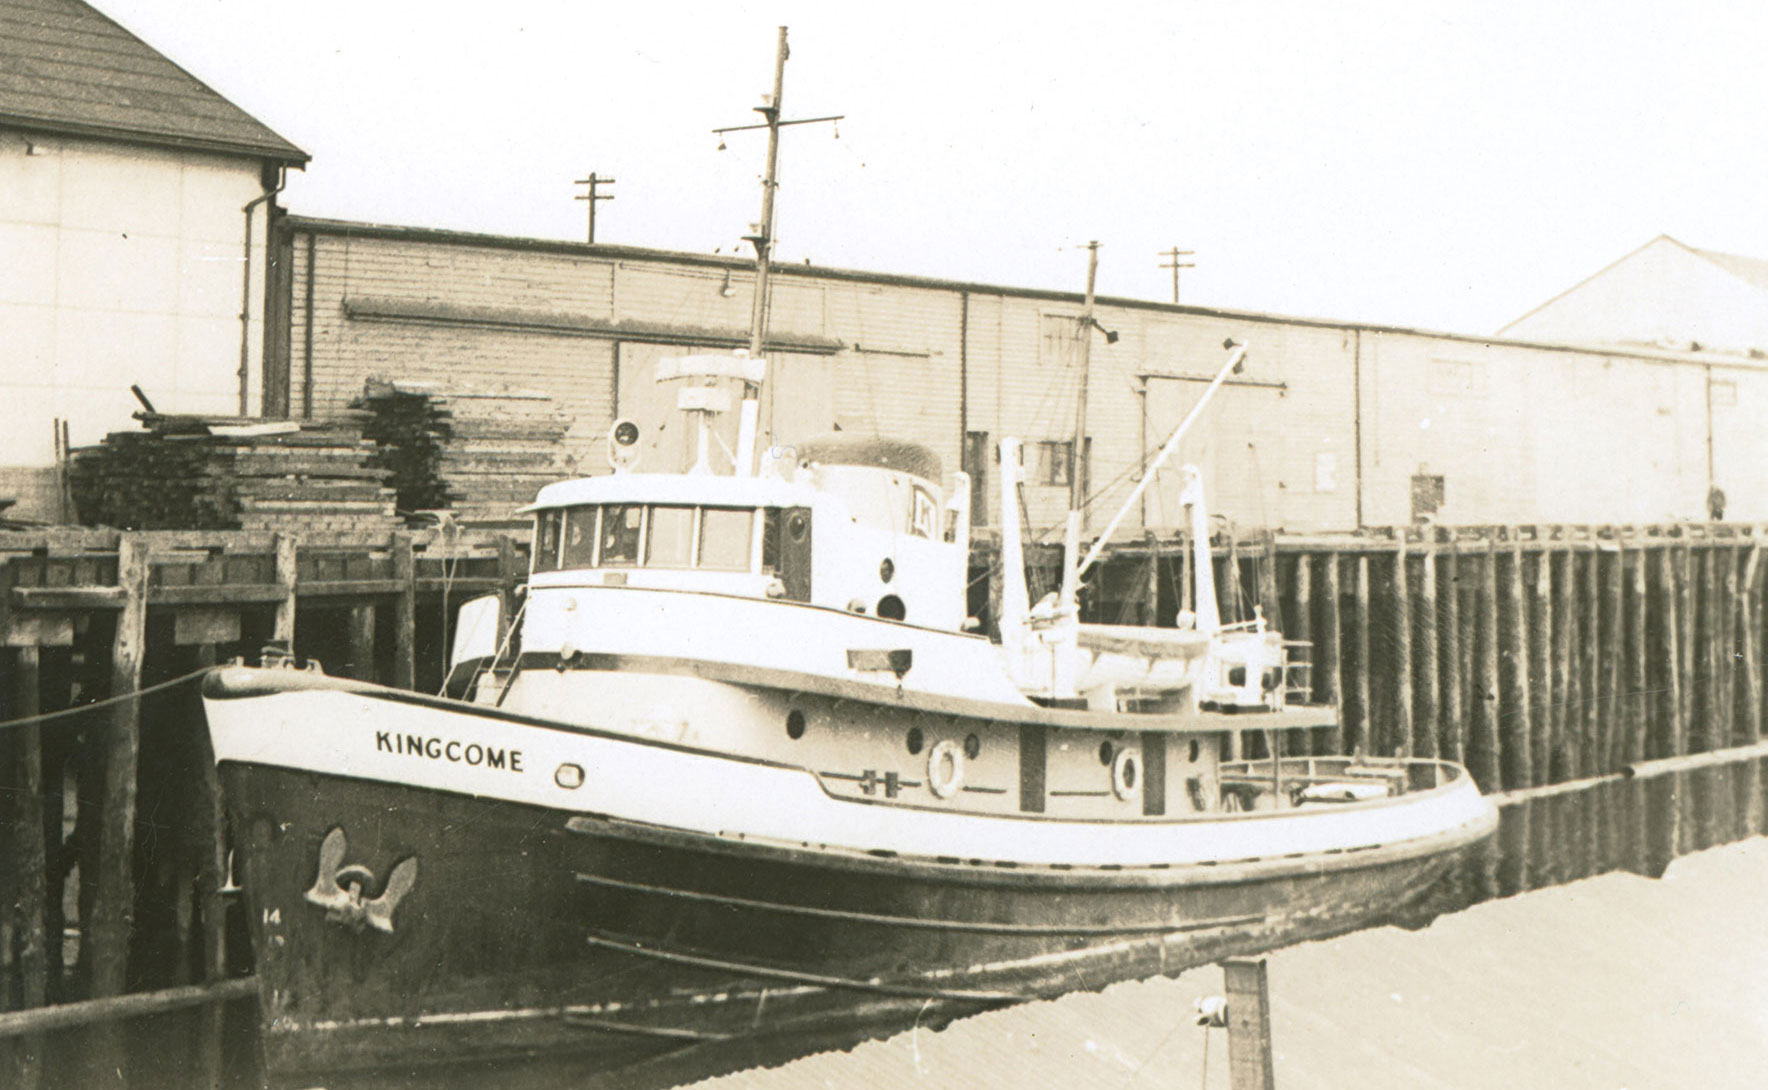 Vessel named "Kingcome" moored at a dock in front of cannery buildings